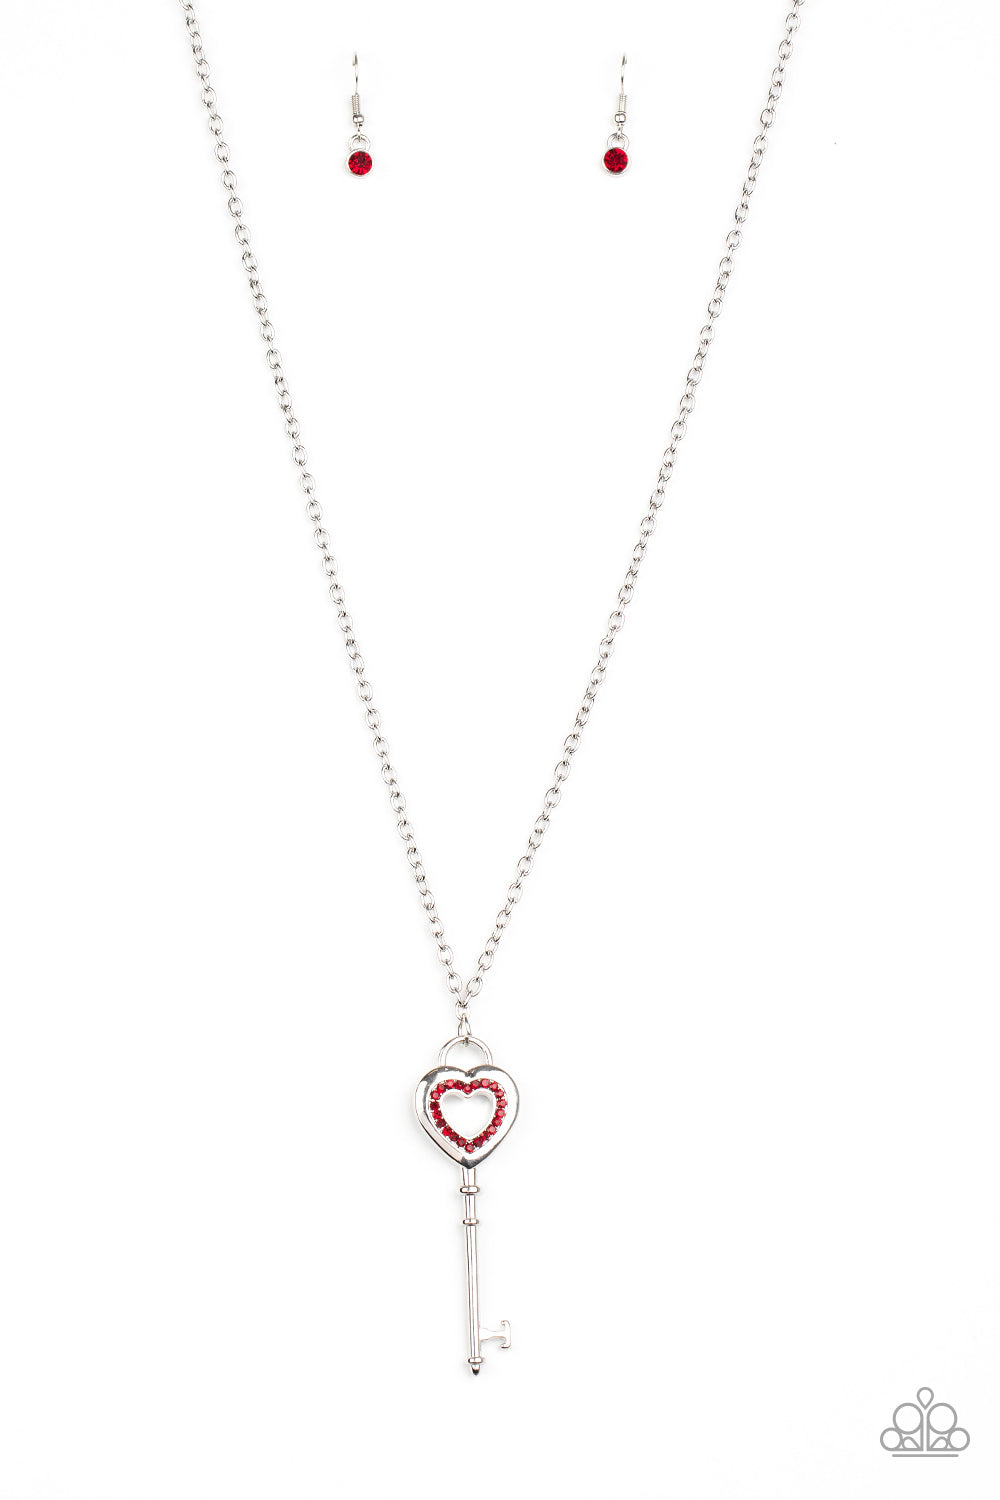 UNLOCK YOUR HEART - RED RUBY RHINESTONES SILVER KEY NECKLACE